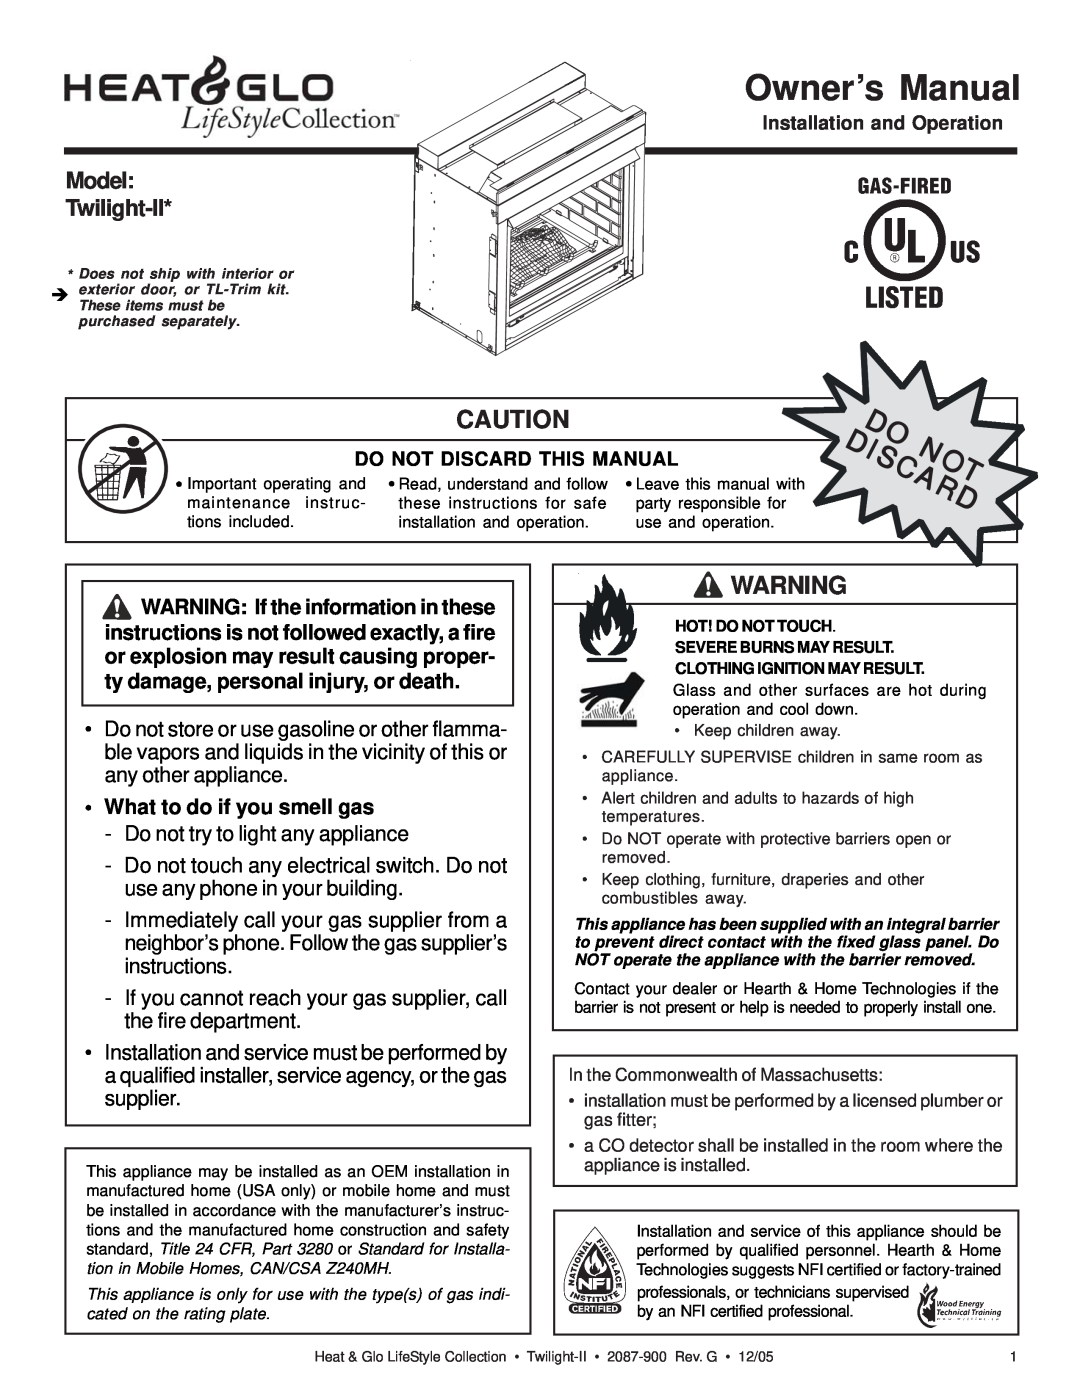 Heat & Glo LifeStyle TWILIGHT-II owner manual What to do if you smell gas, Model Twilight-II 